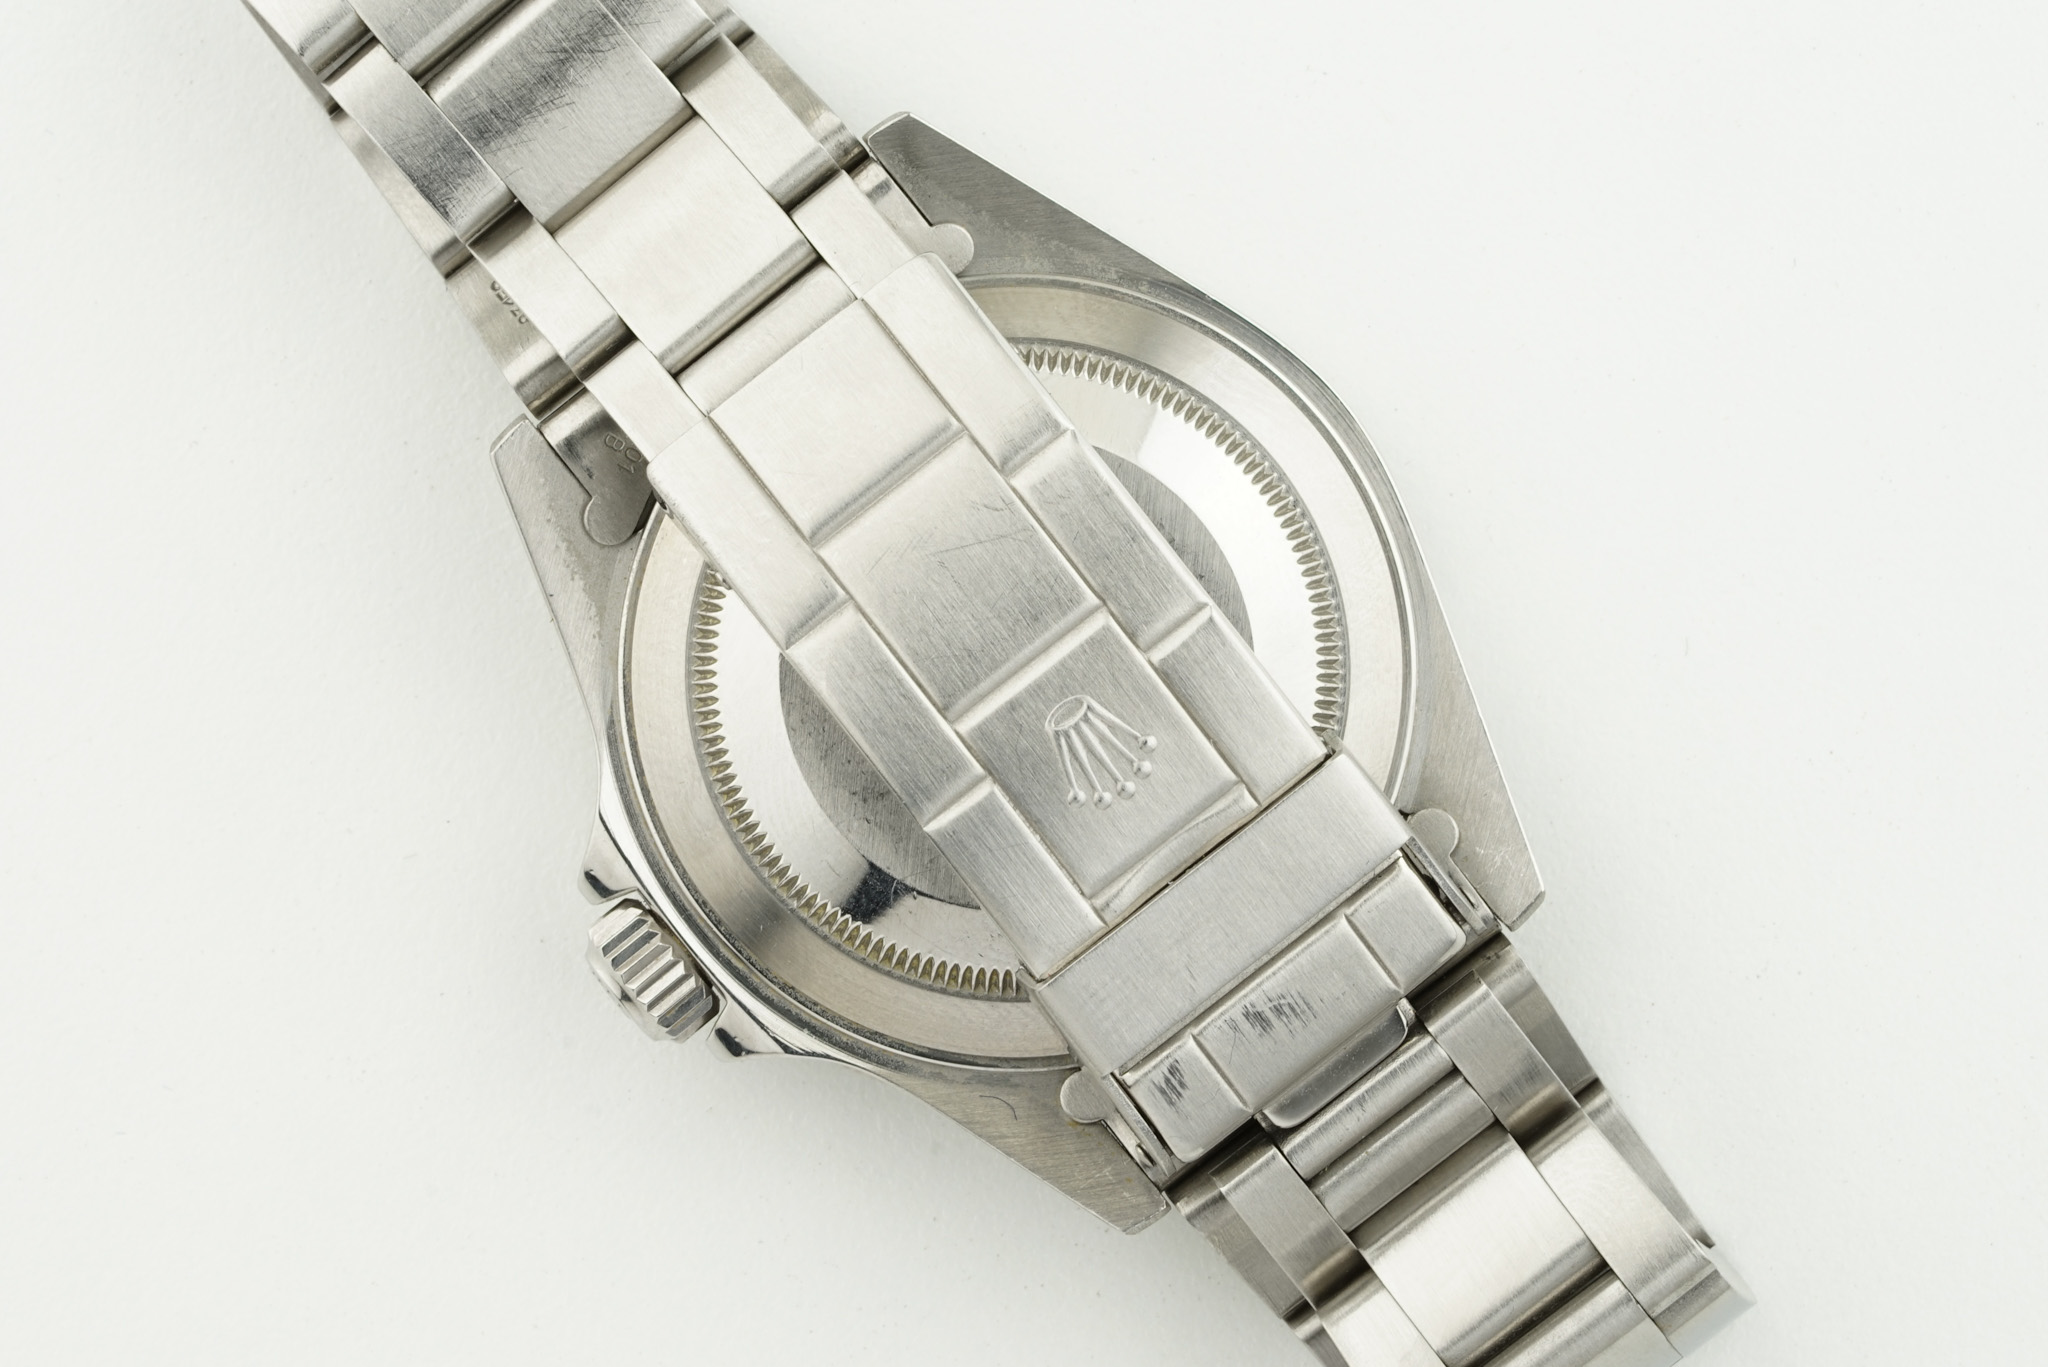 ROLEX OYSTER PERPETUAL DATE SUBMARINER W/ GUARANTEE PAPERS REF. 16610 CIRCA 1989 - Image 3 of 3